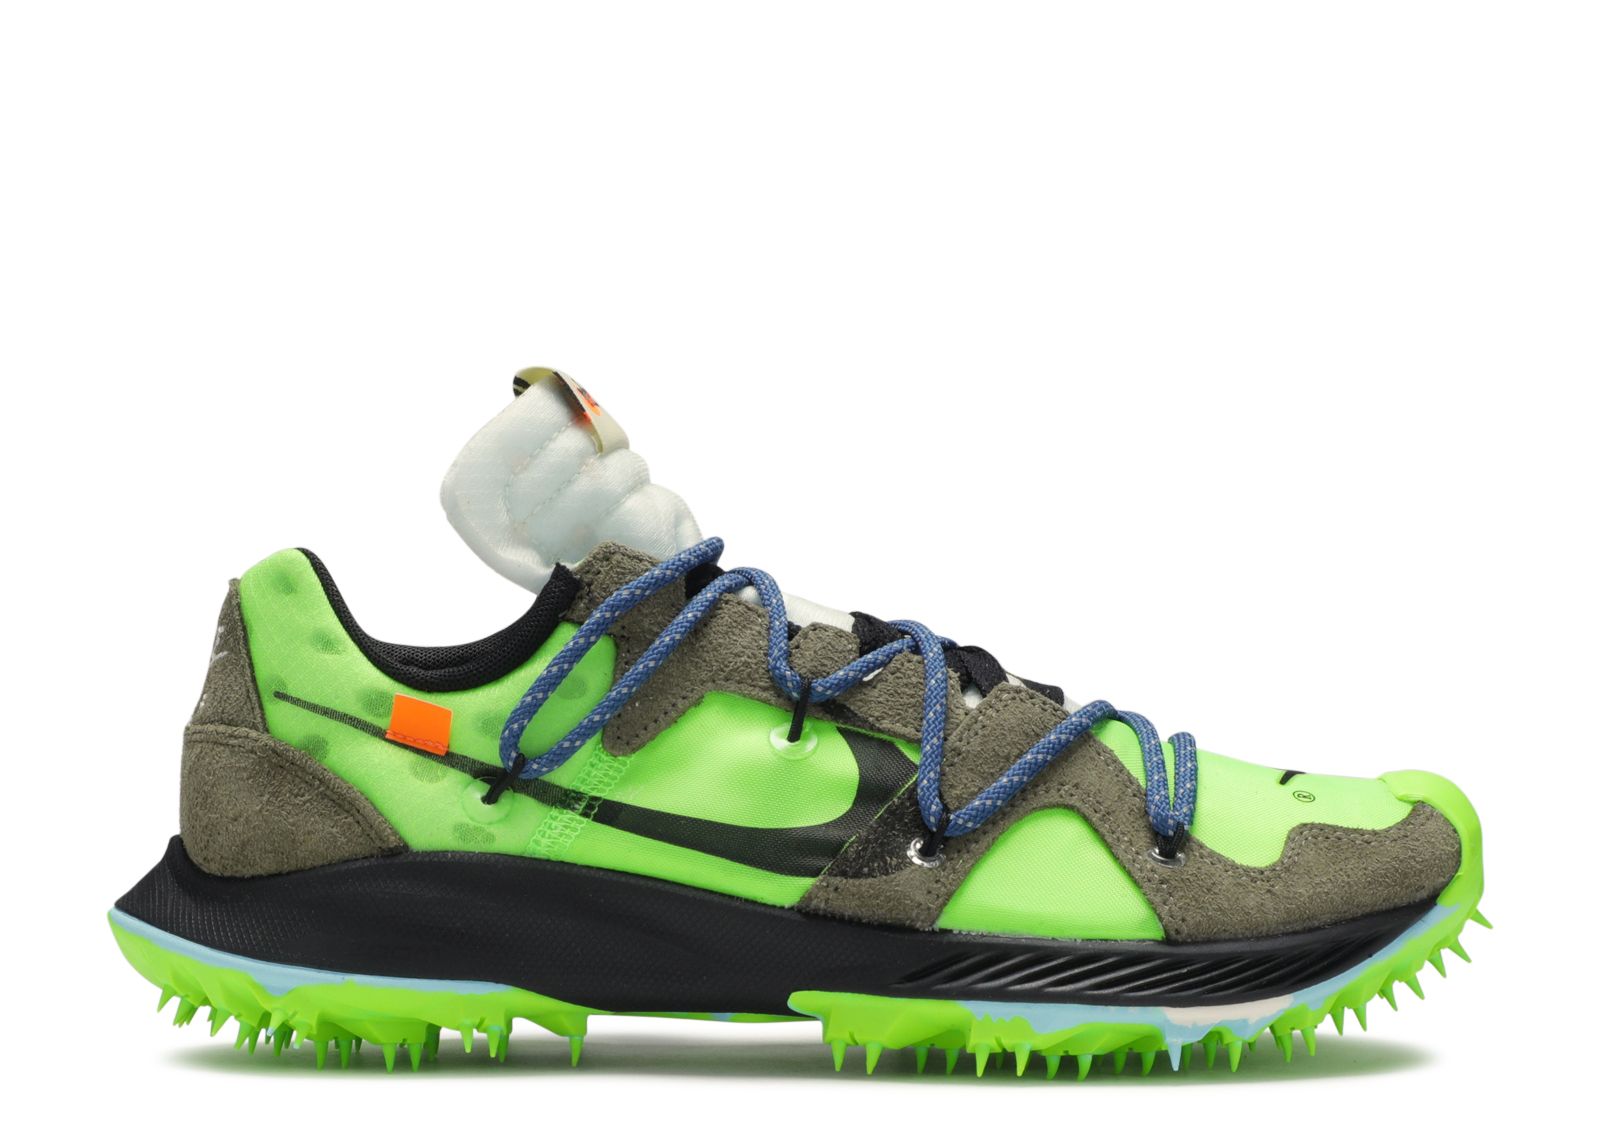 Кроссовки Nike Off-White X Wmns Air Zoom Terra Kiger 5 'Athlete In Progress - Electric Green', зеленый кроссовки nike off white x air zoom tempo next% white красный